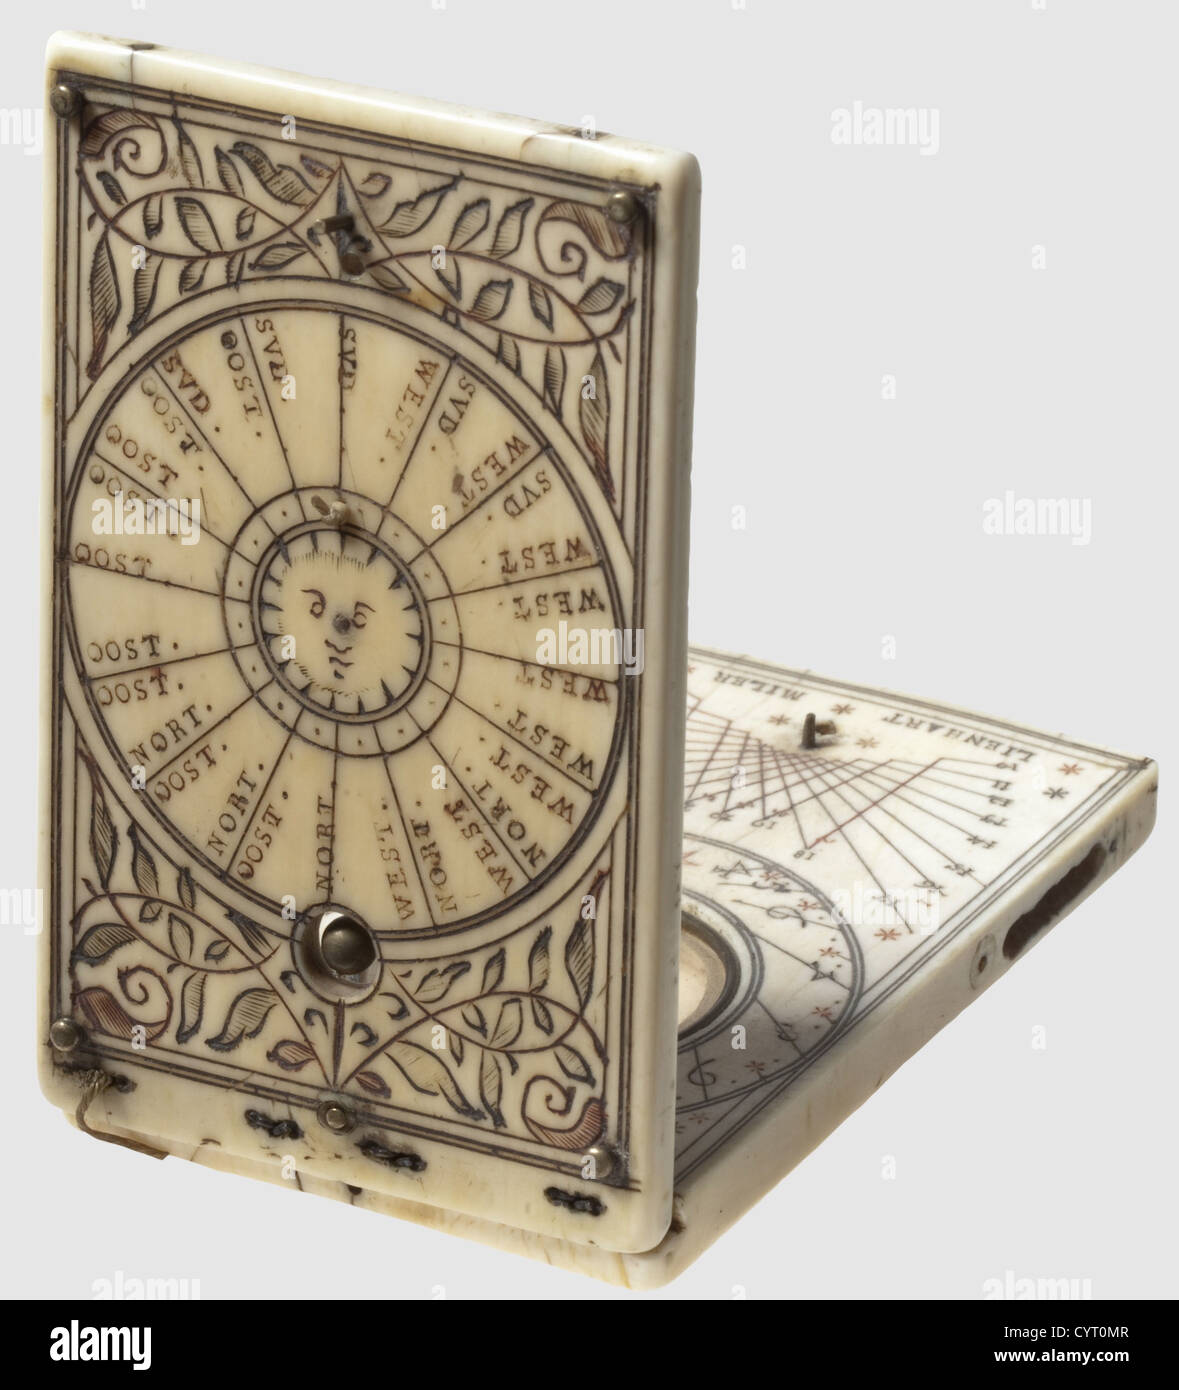 A German ivory folding sundial,Nuremberg,Leonhard Miller,1617 Of rectangular form with finely engraved and chased decoration.Folding lid with wire hinges and attached plumb bob.Compass with intact glass cover,the lower edge signed 'Lienhard Miler 1617'.The left edge with a small open compartment,the cover missing.Size 9.1 x 5.2 cm.Rare,superbly crafted folding sundial with beautiful decoration from late renaissance.Leonhard Müller,sundial maker,is known to have worked in Nuremberg between 1594 and 1653.Some of his extremely elaborate ivory sundia,Additional-Rights-Clearences-Not Available Stock Photo